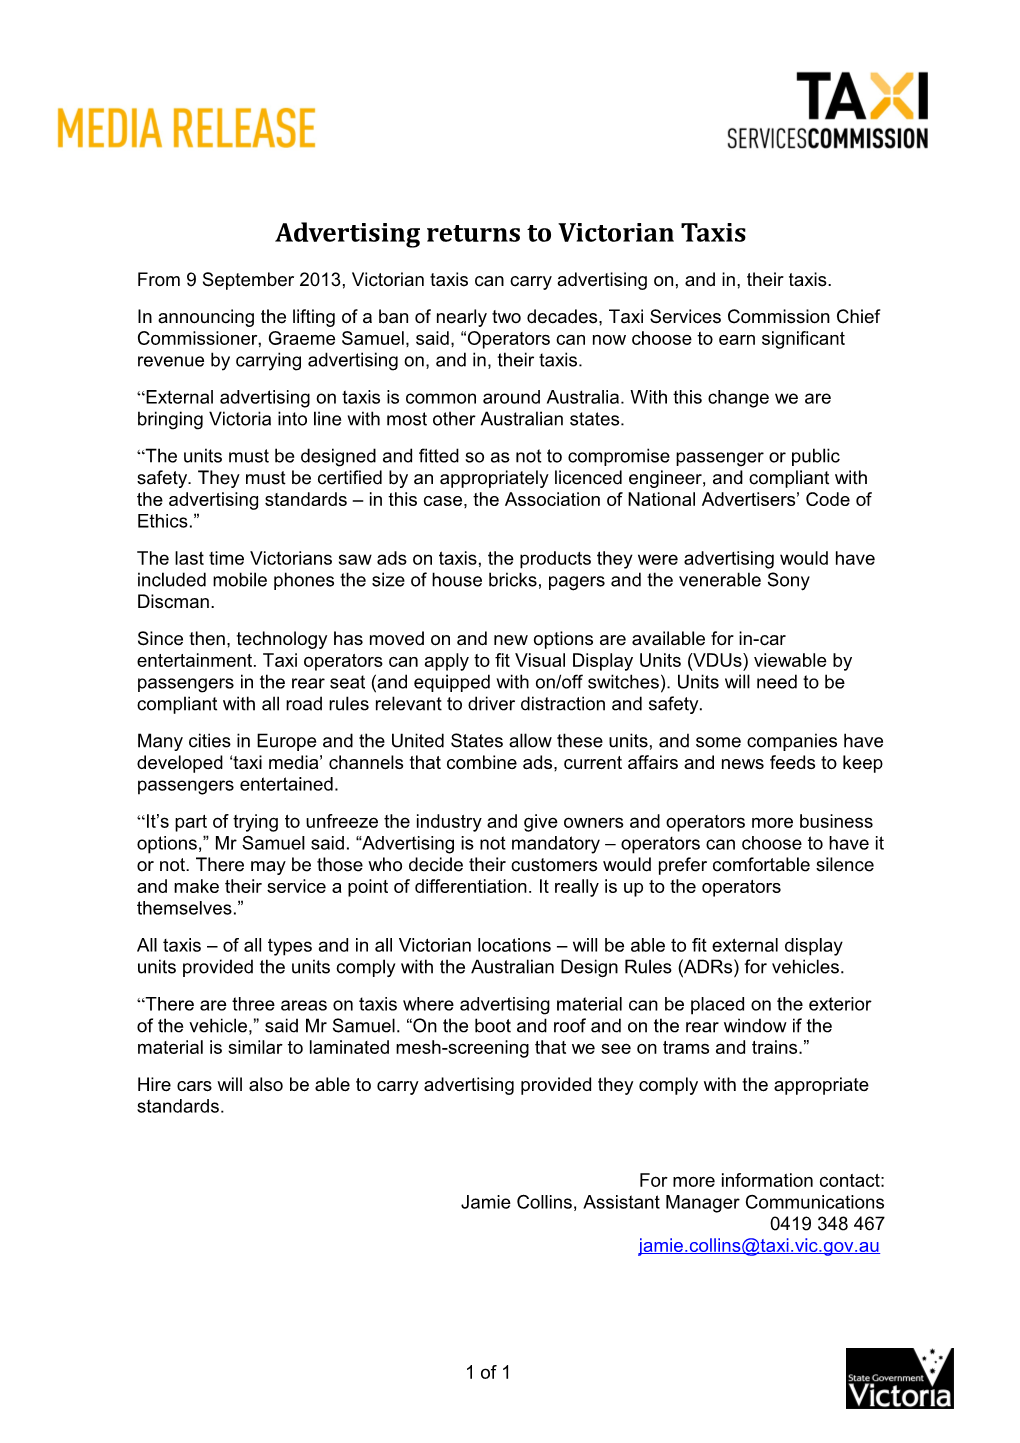 Advertising in Taxis - Media Release